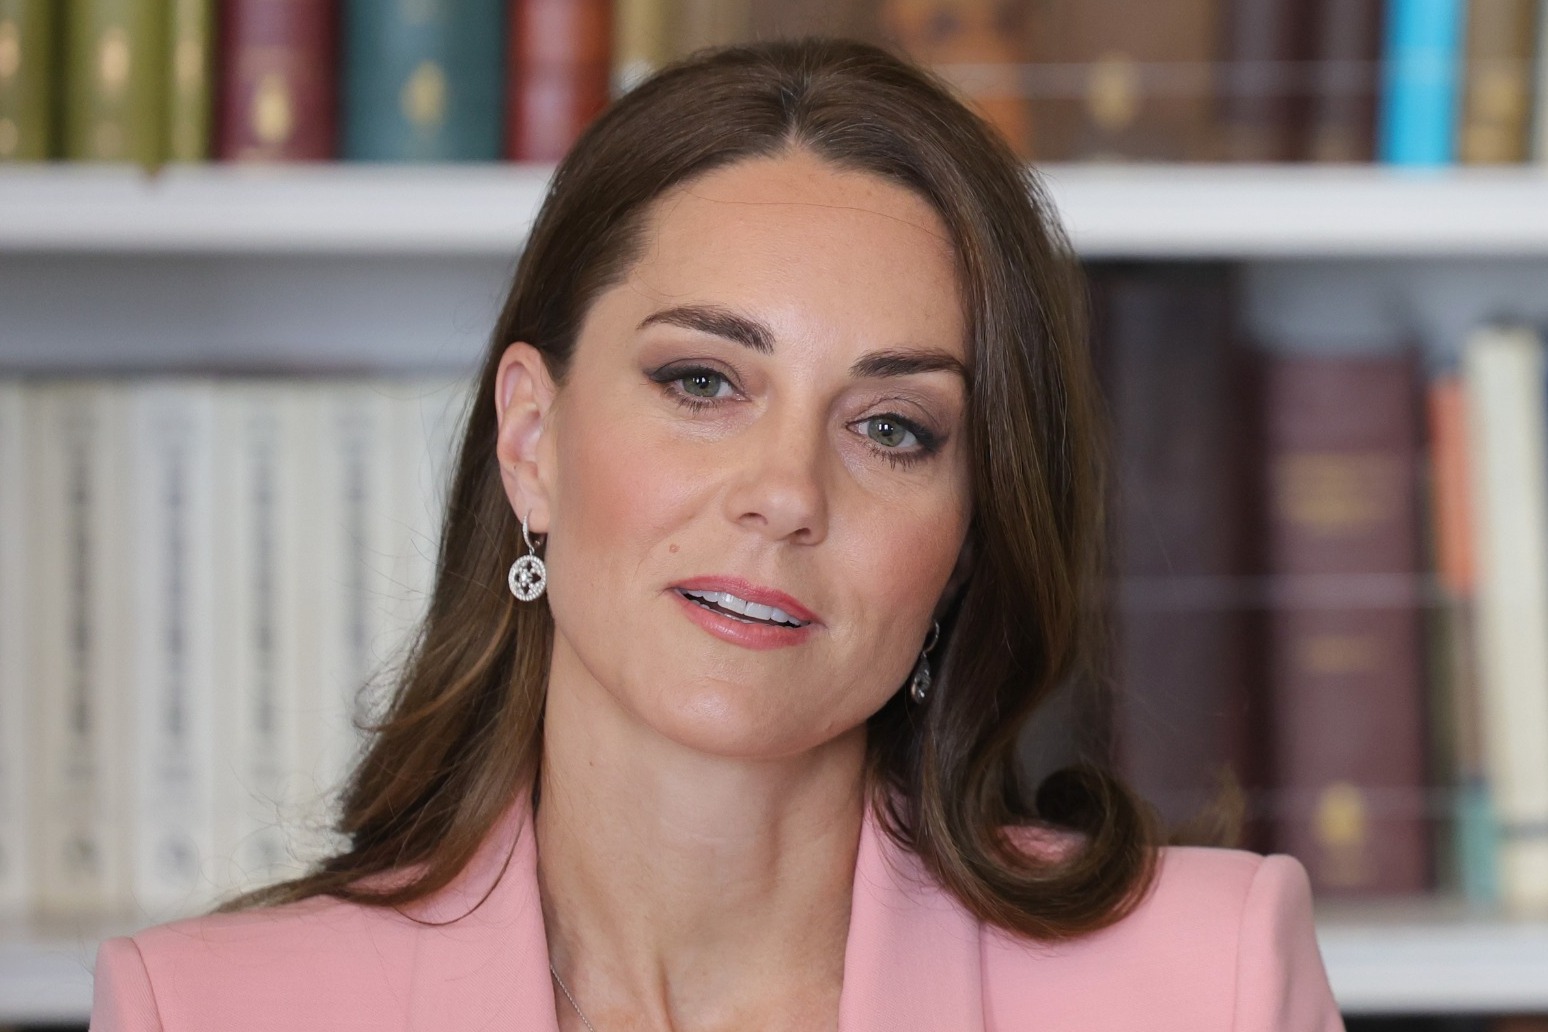 Kate praises childrens hospices for helping families through the toughest times